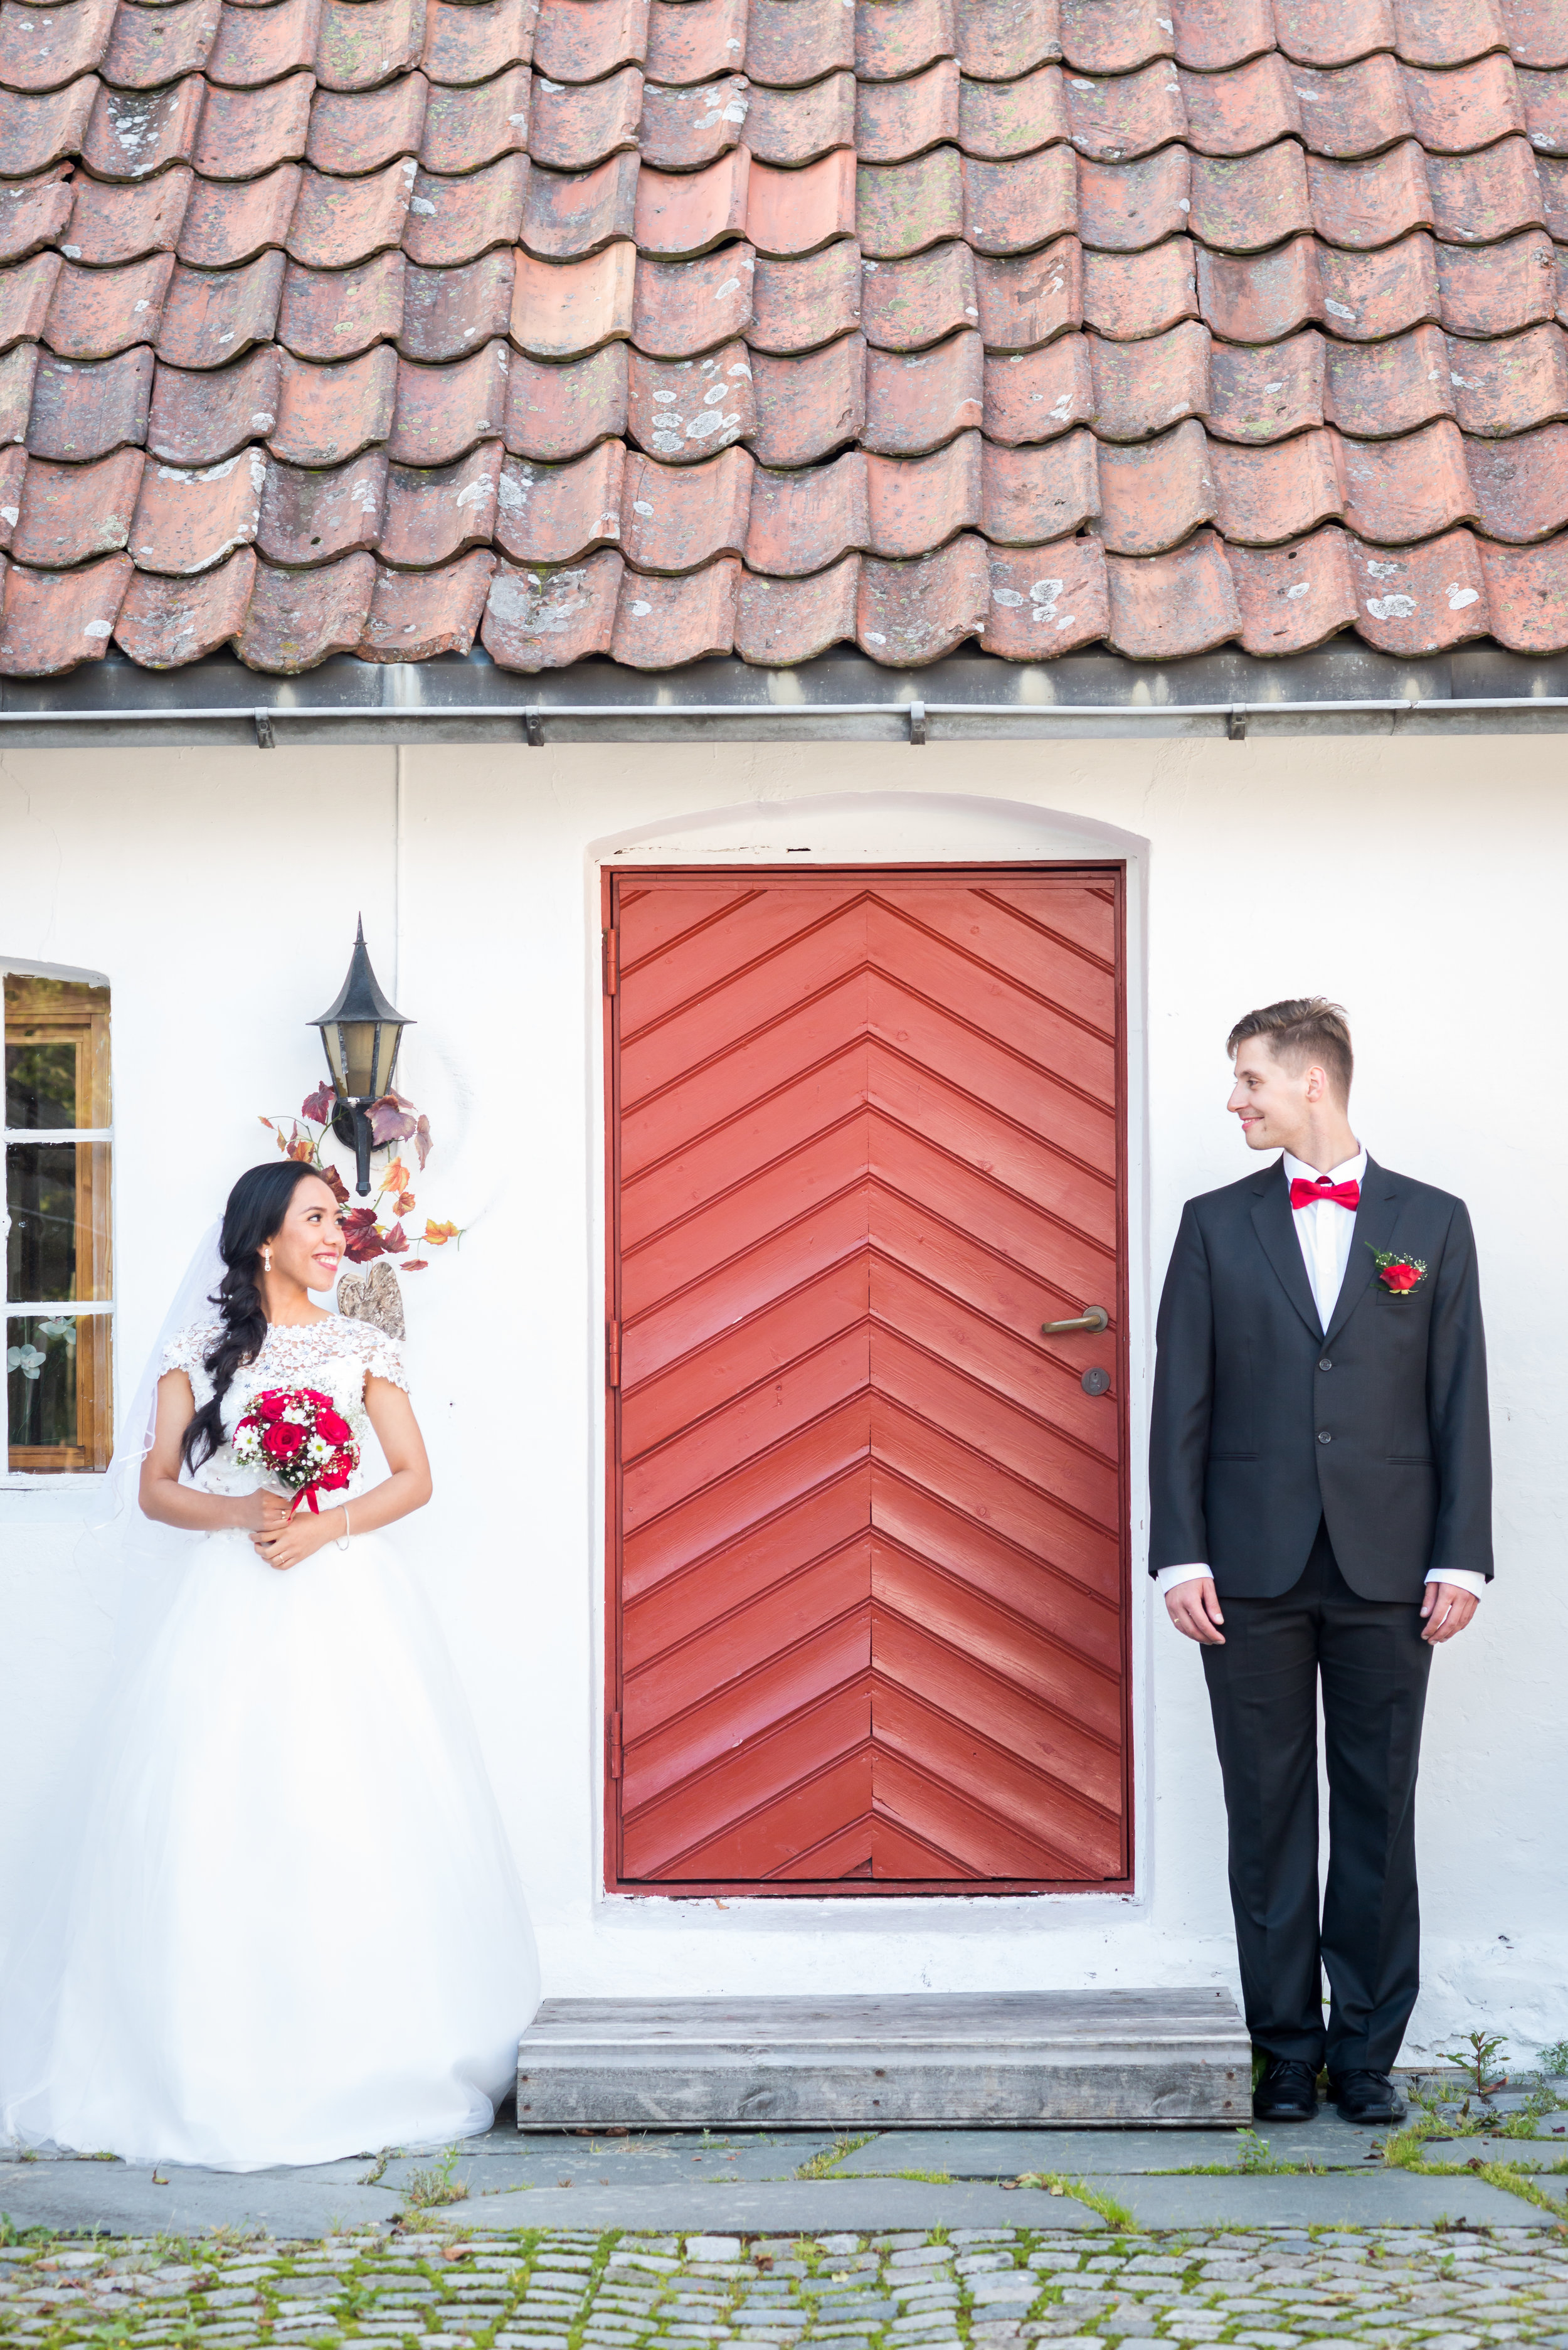 Bride and groom with a red door Stavanger wedding Guillem Cheung Bryllup